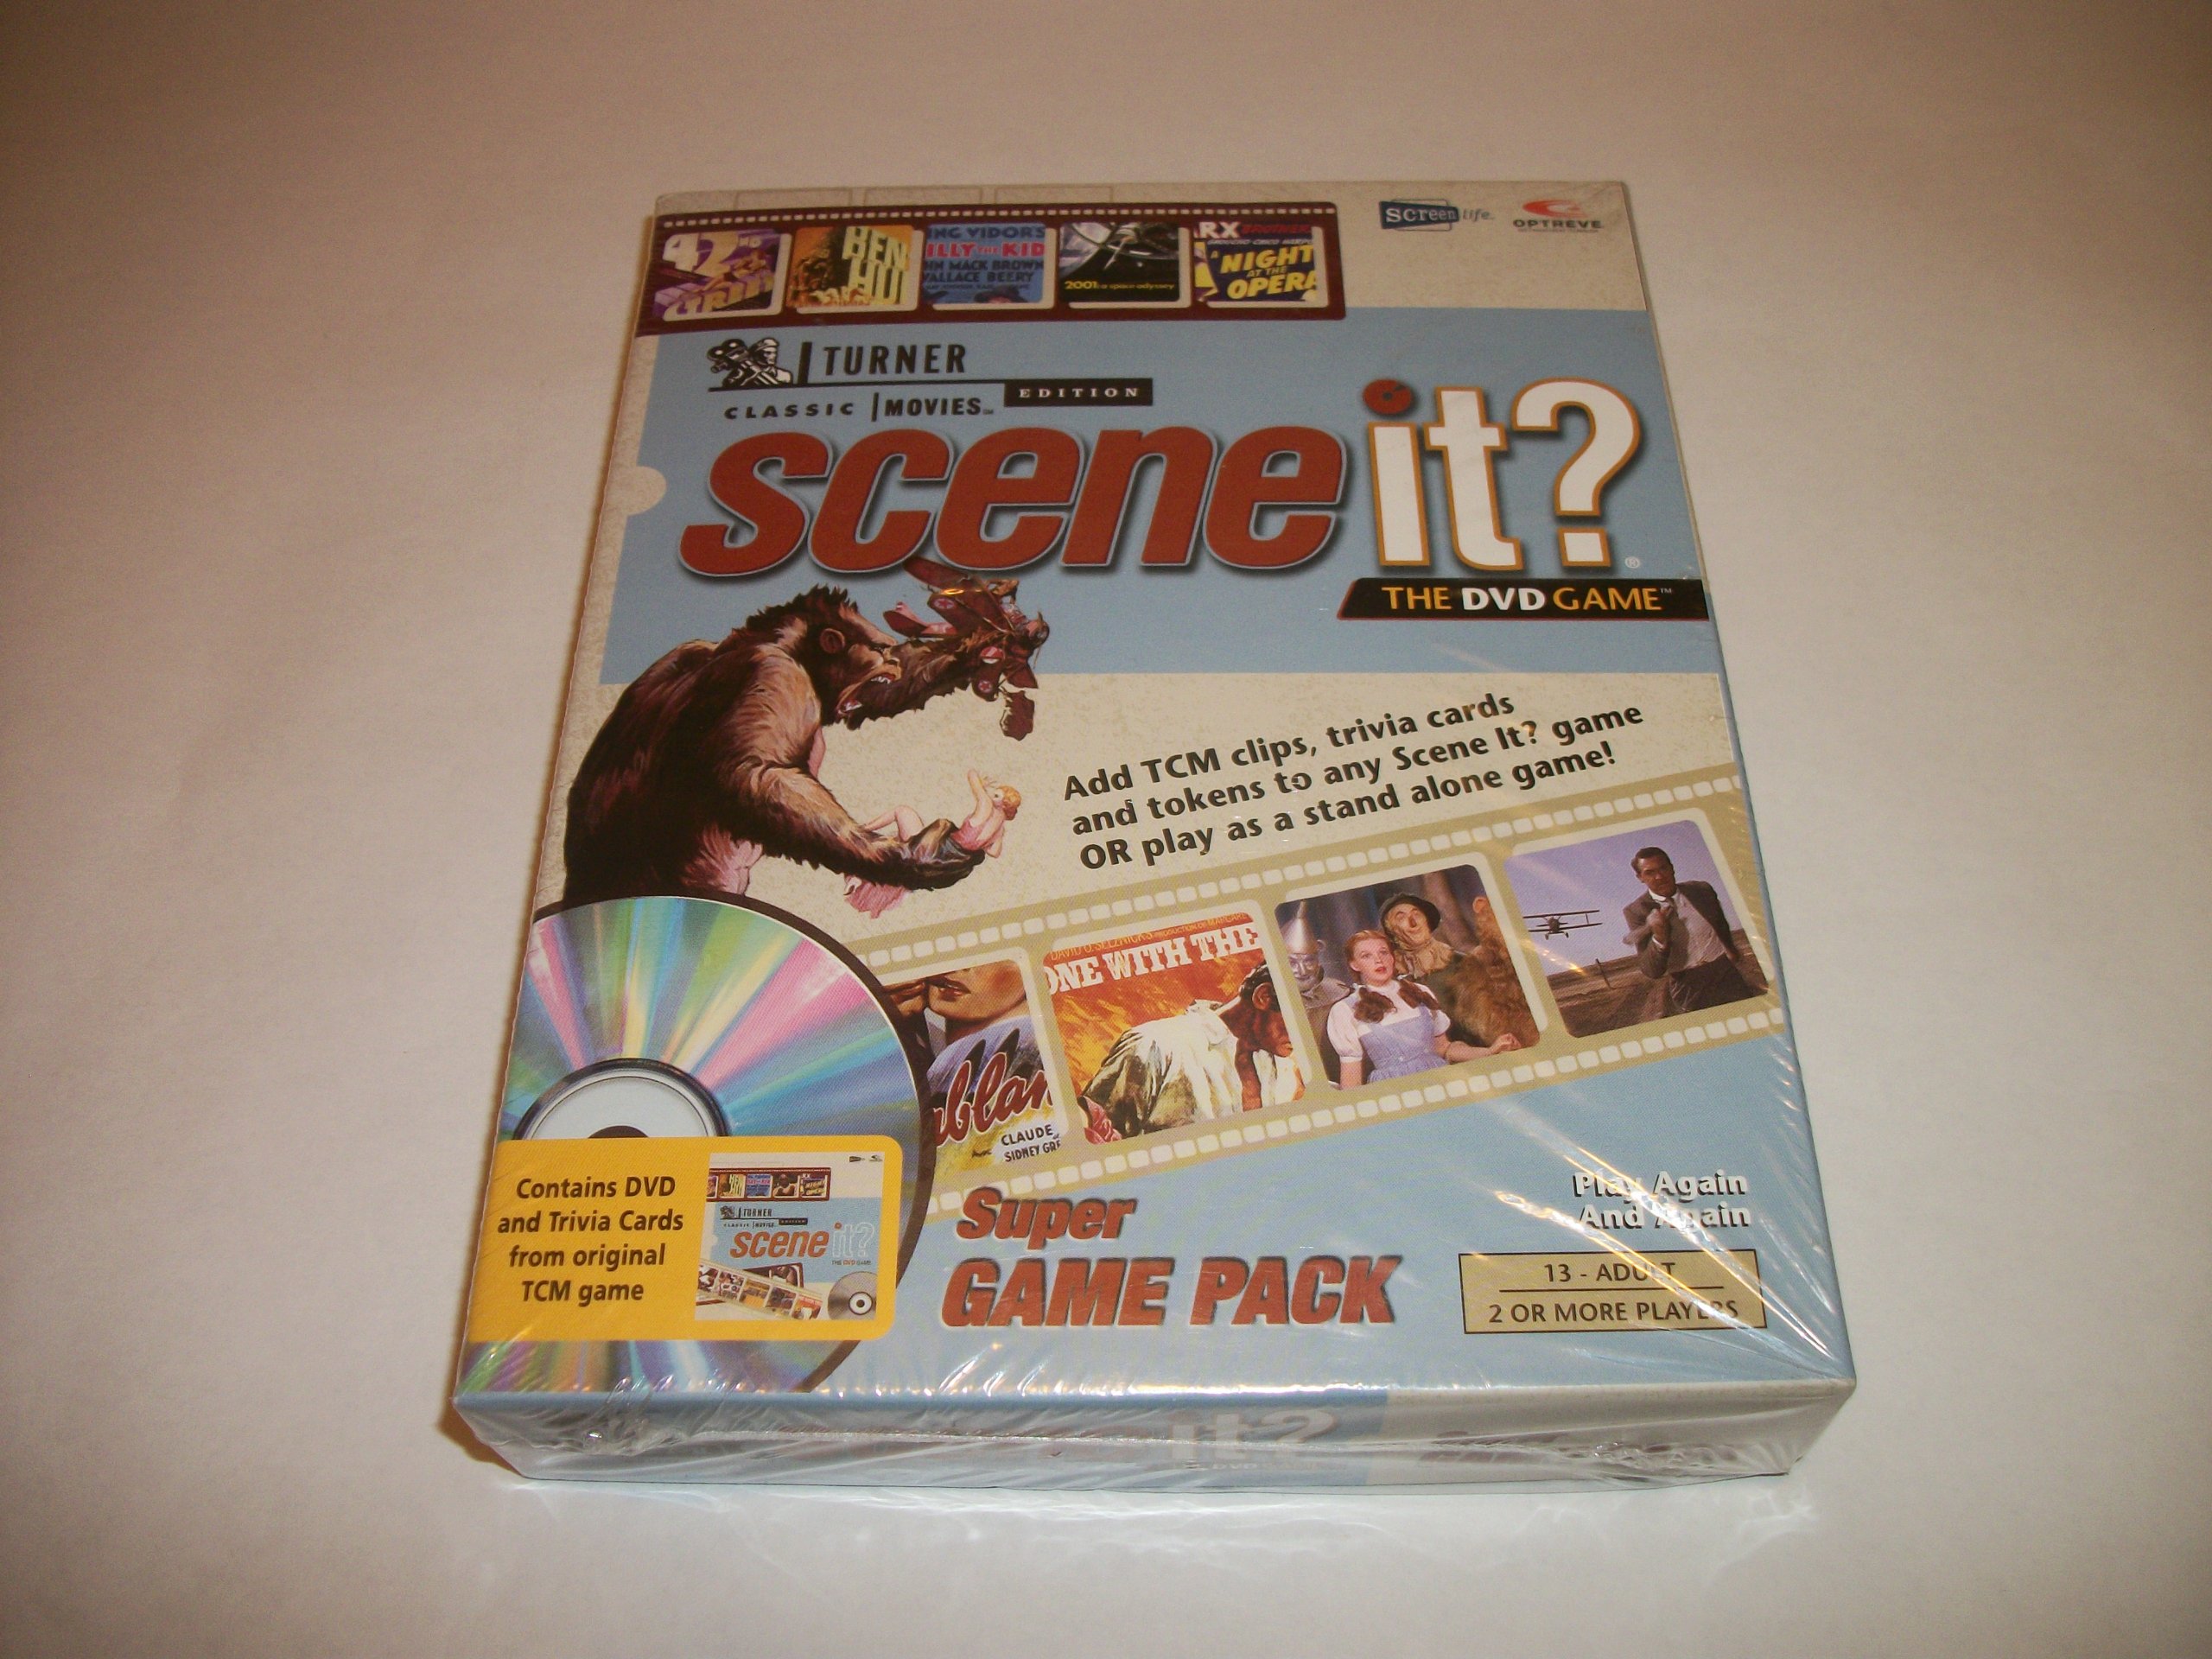 Scene It? Super Game Pack DVD - Turner Classic Movies Edition by Mattel